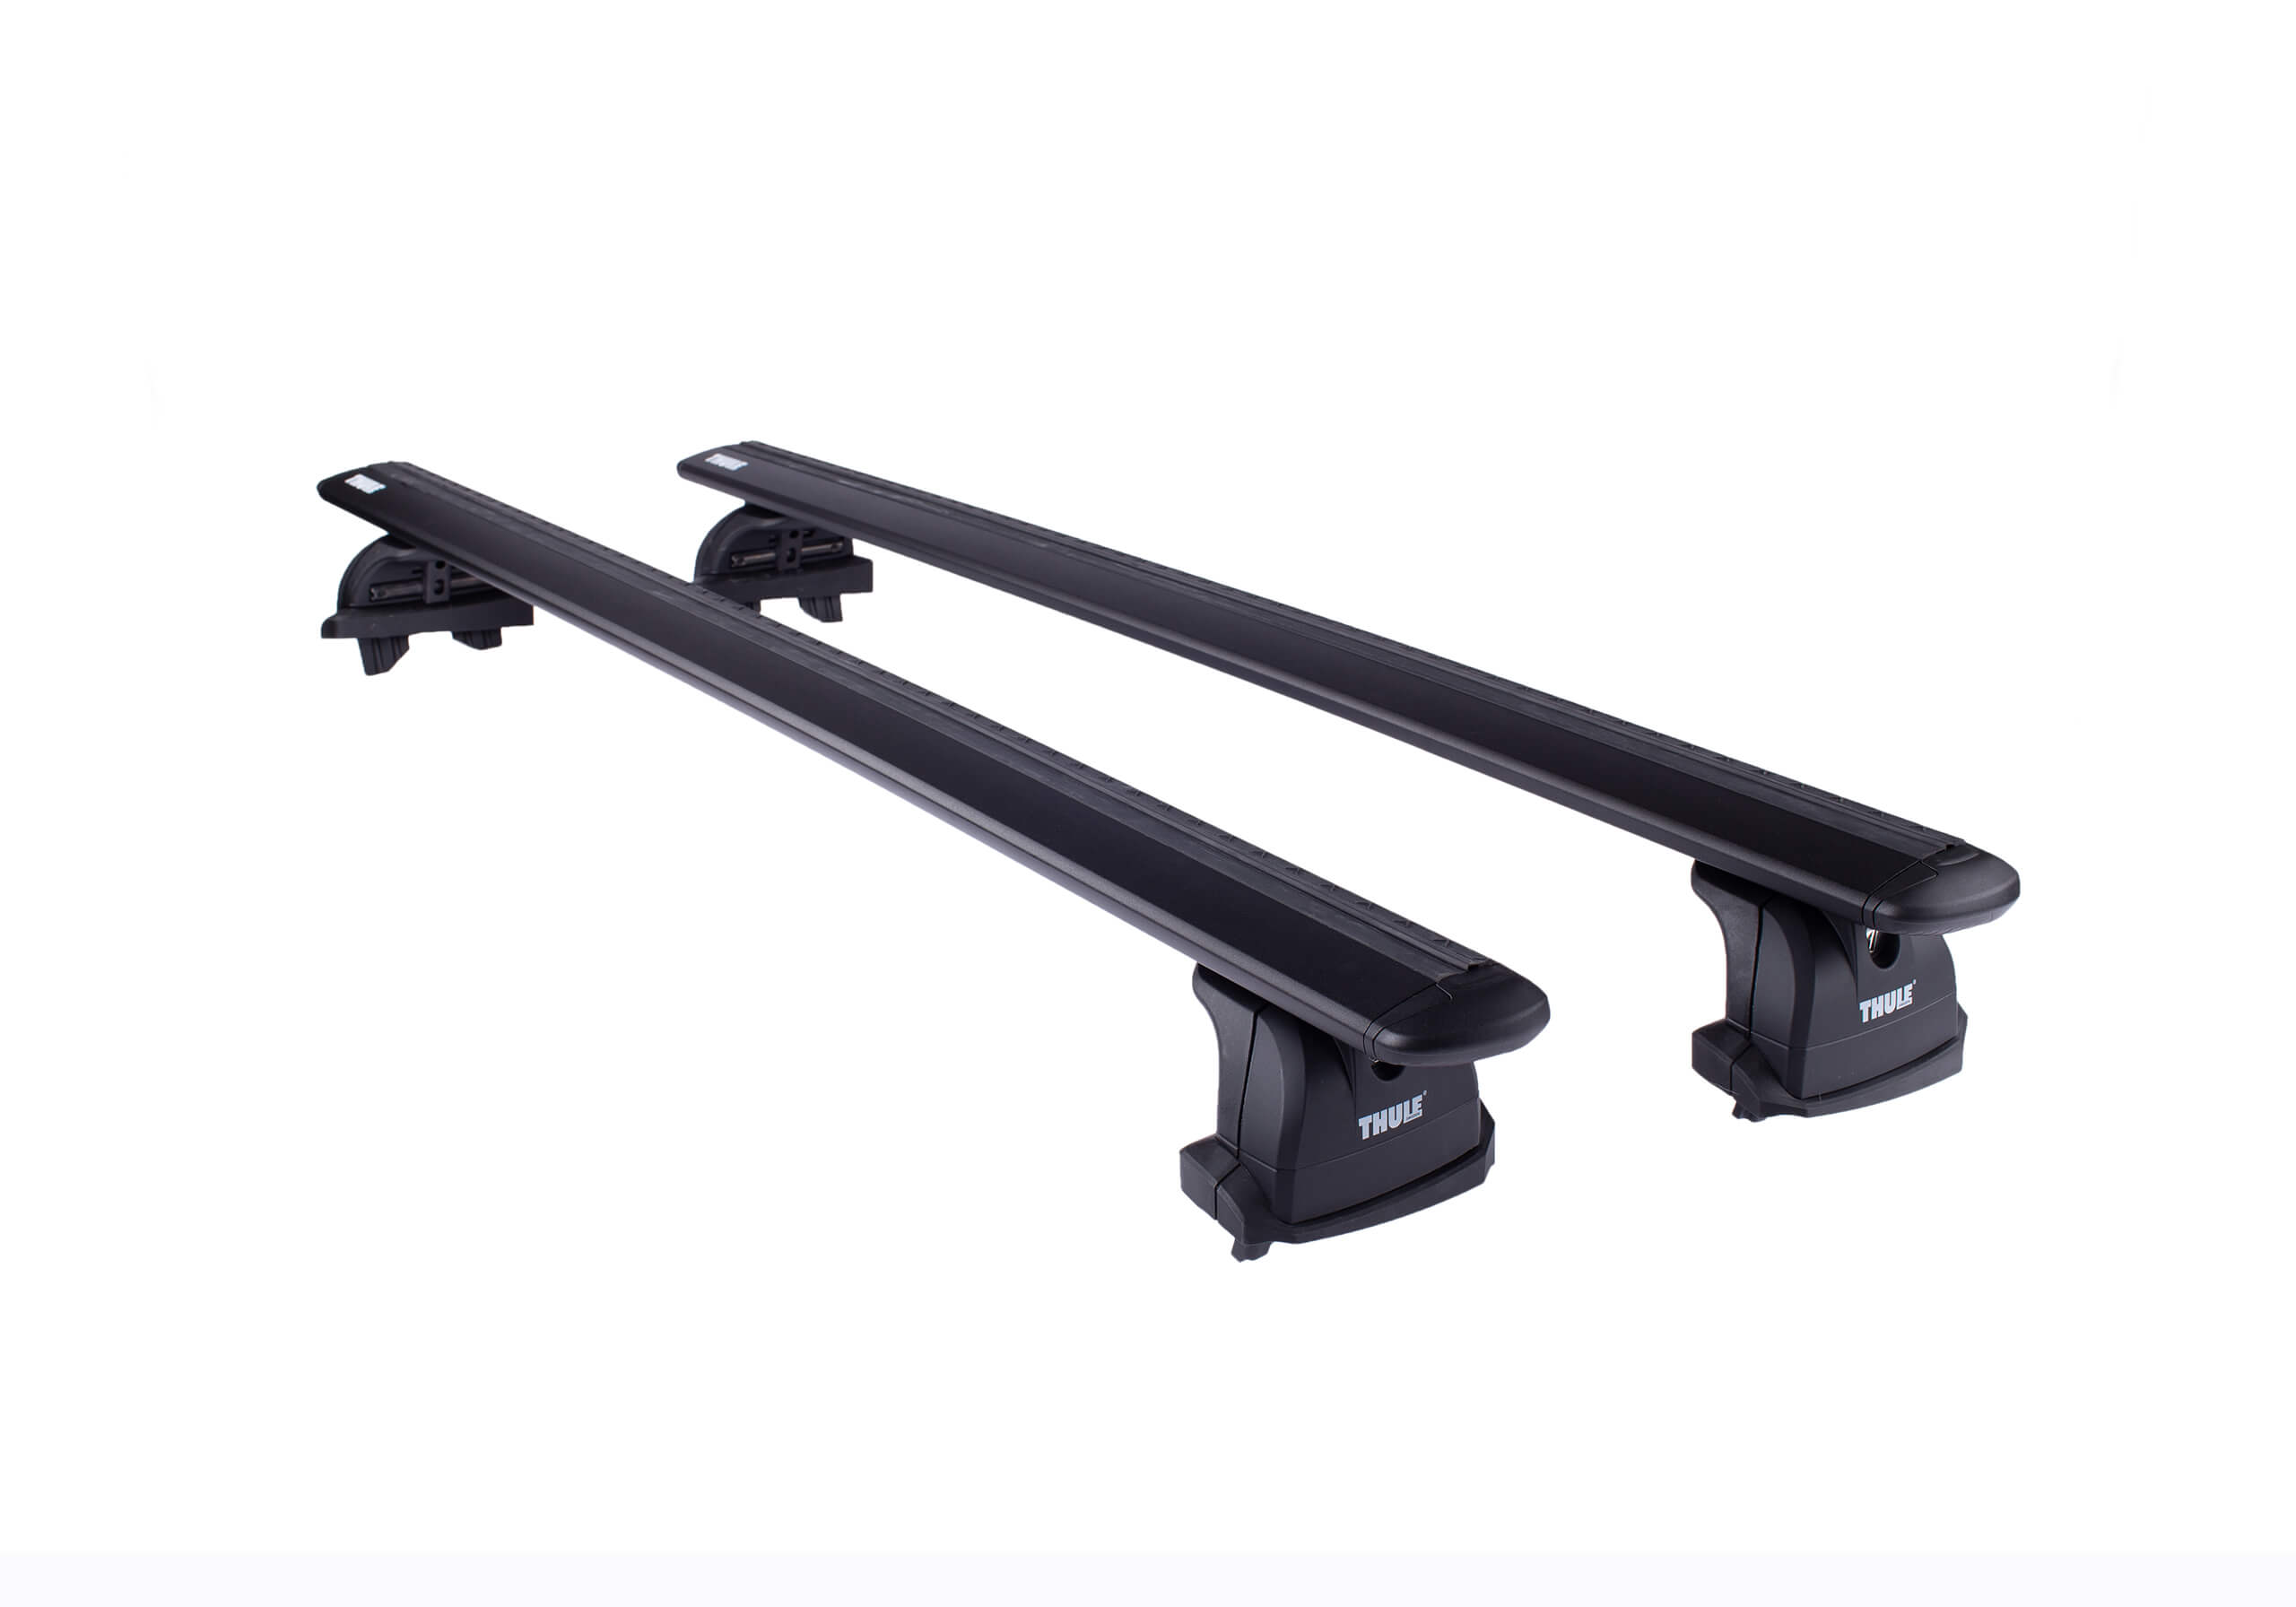 Ford Focus estate (2004 to 2008):Thule black WingBars package - 753, 7112B, 3033